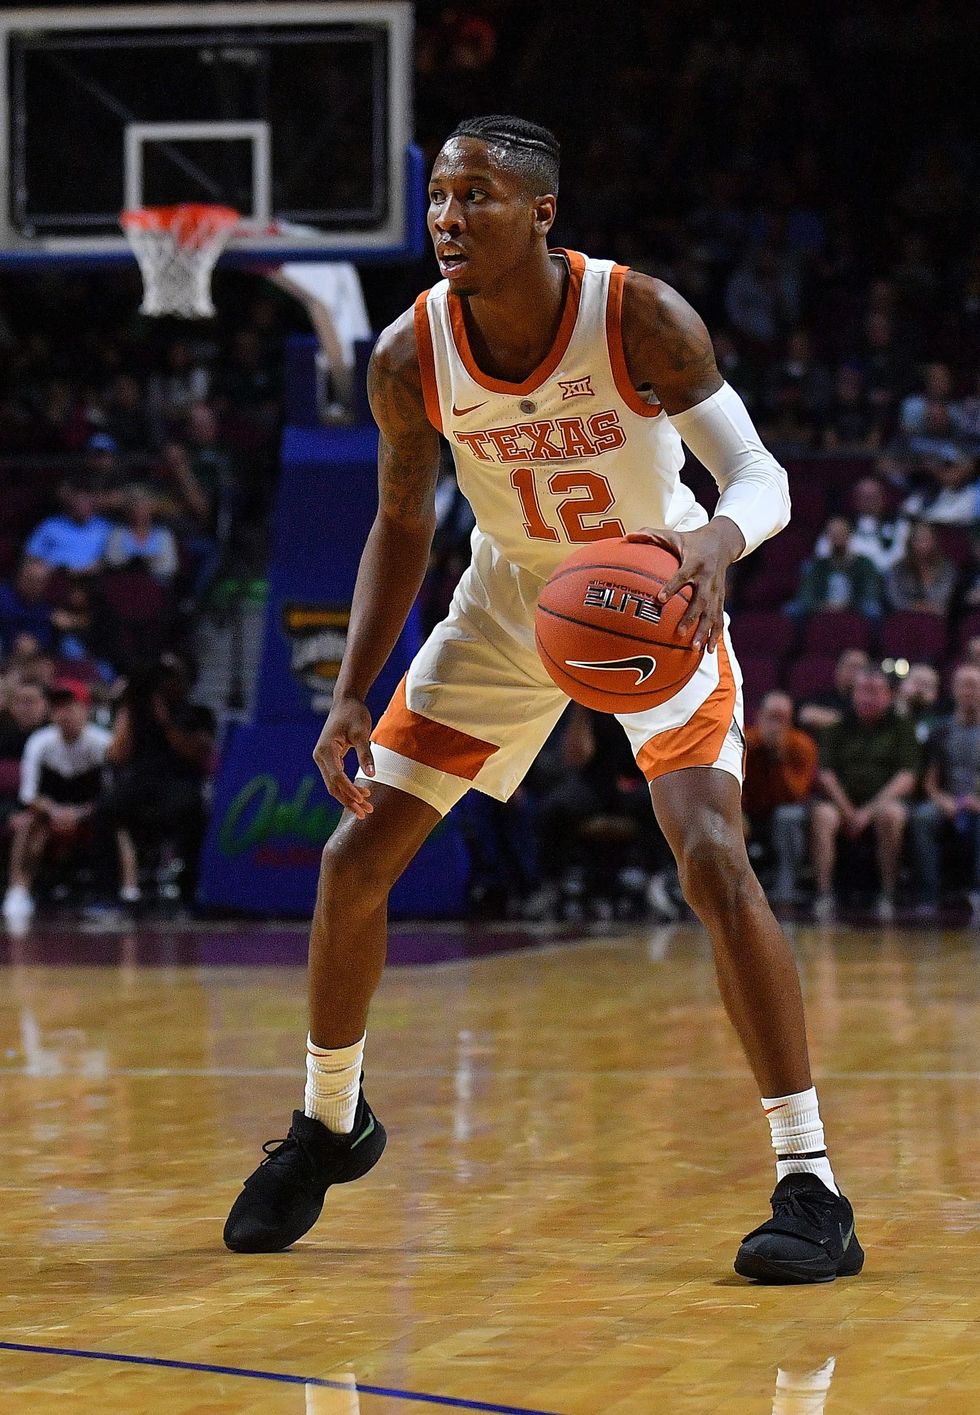 College basketball report: UT gets big win, A&M struggles, UH knocks of BYU